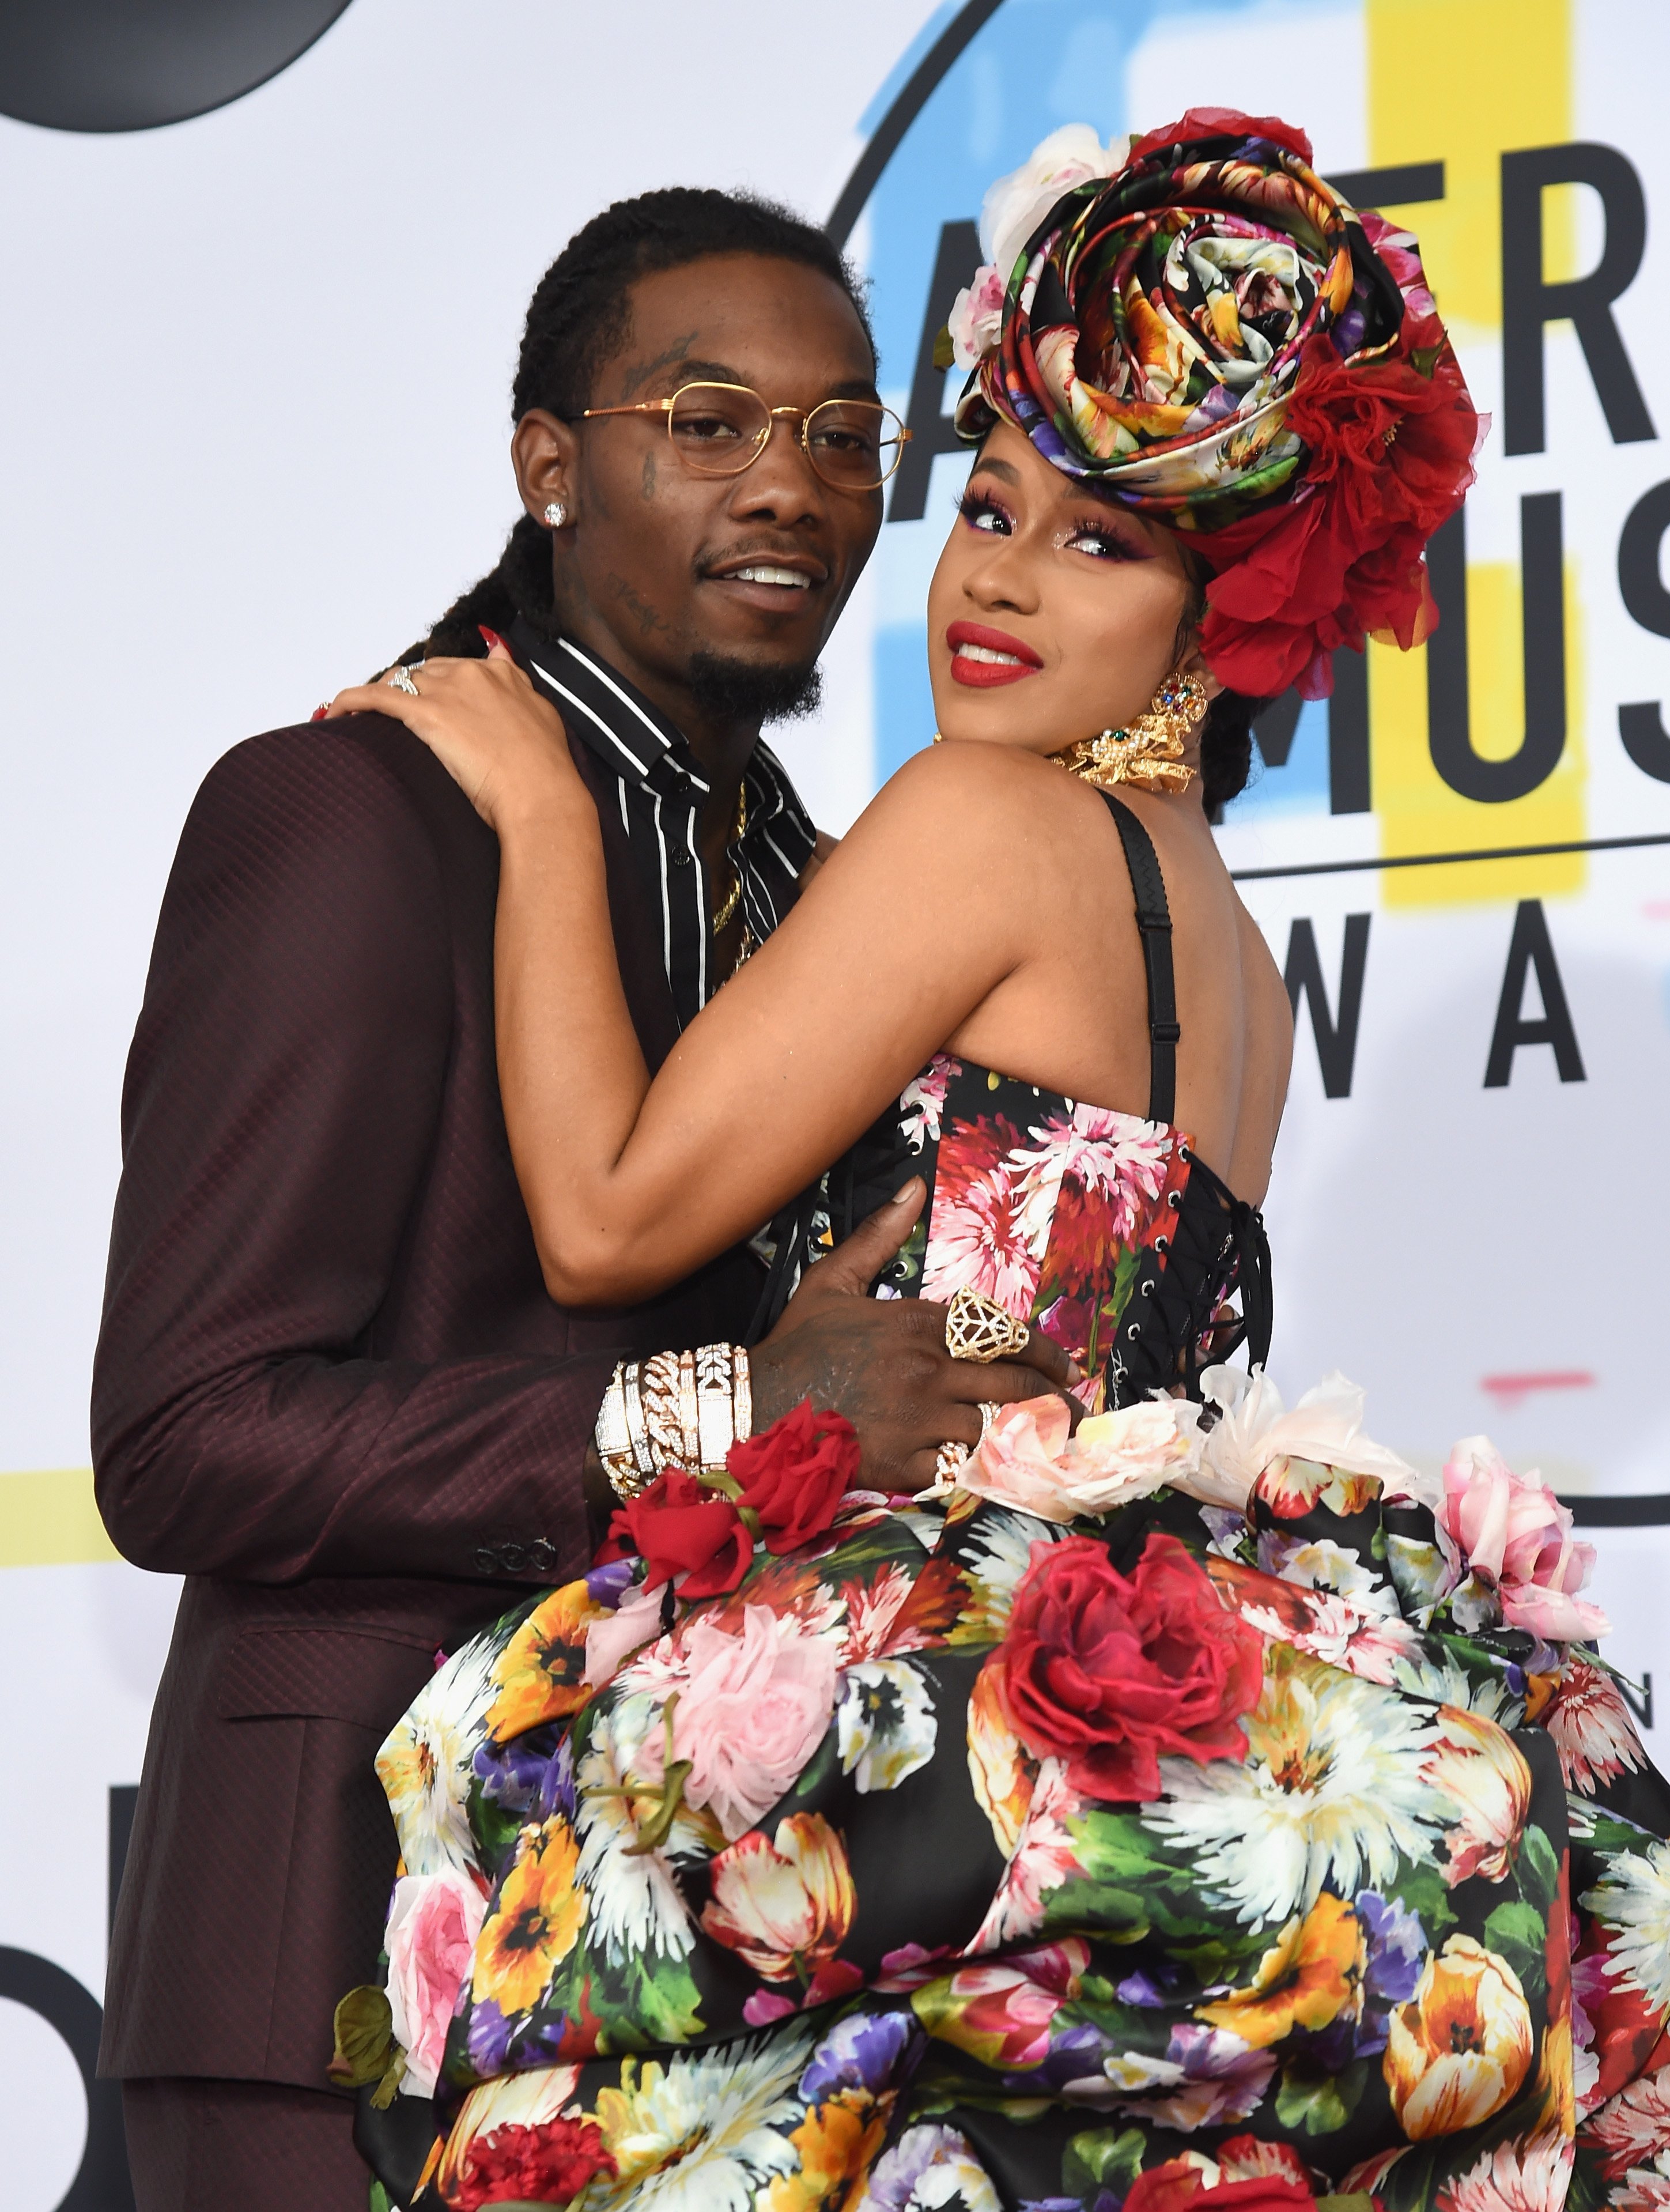 Offset and Cardi B pose at the 2018 American Music Awards at Microsoft Theater on October 9, 2018 in Los Angeles, California. | Source: Getty Images